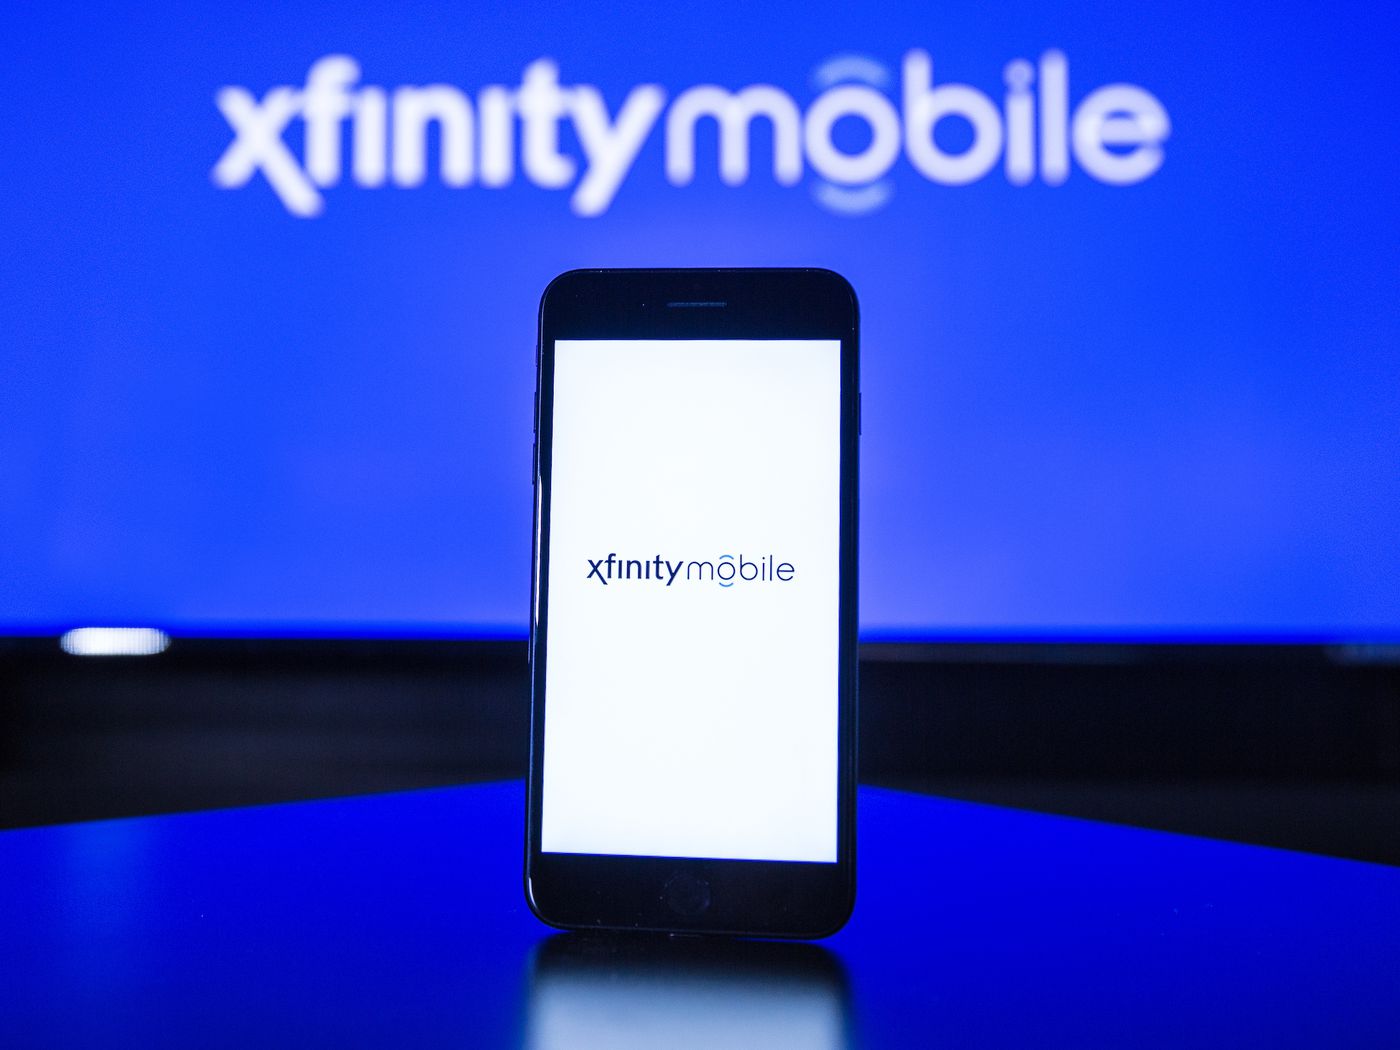 which-network-does-xfinity-mobile-use